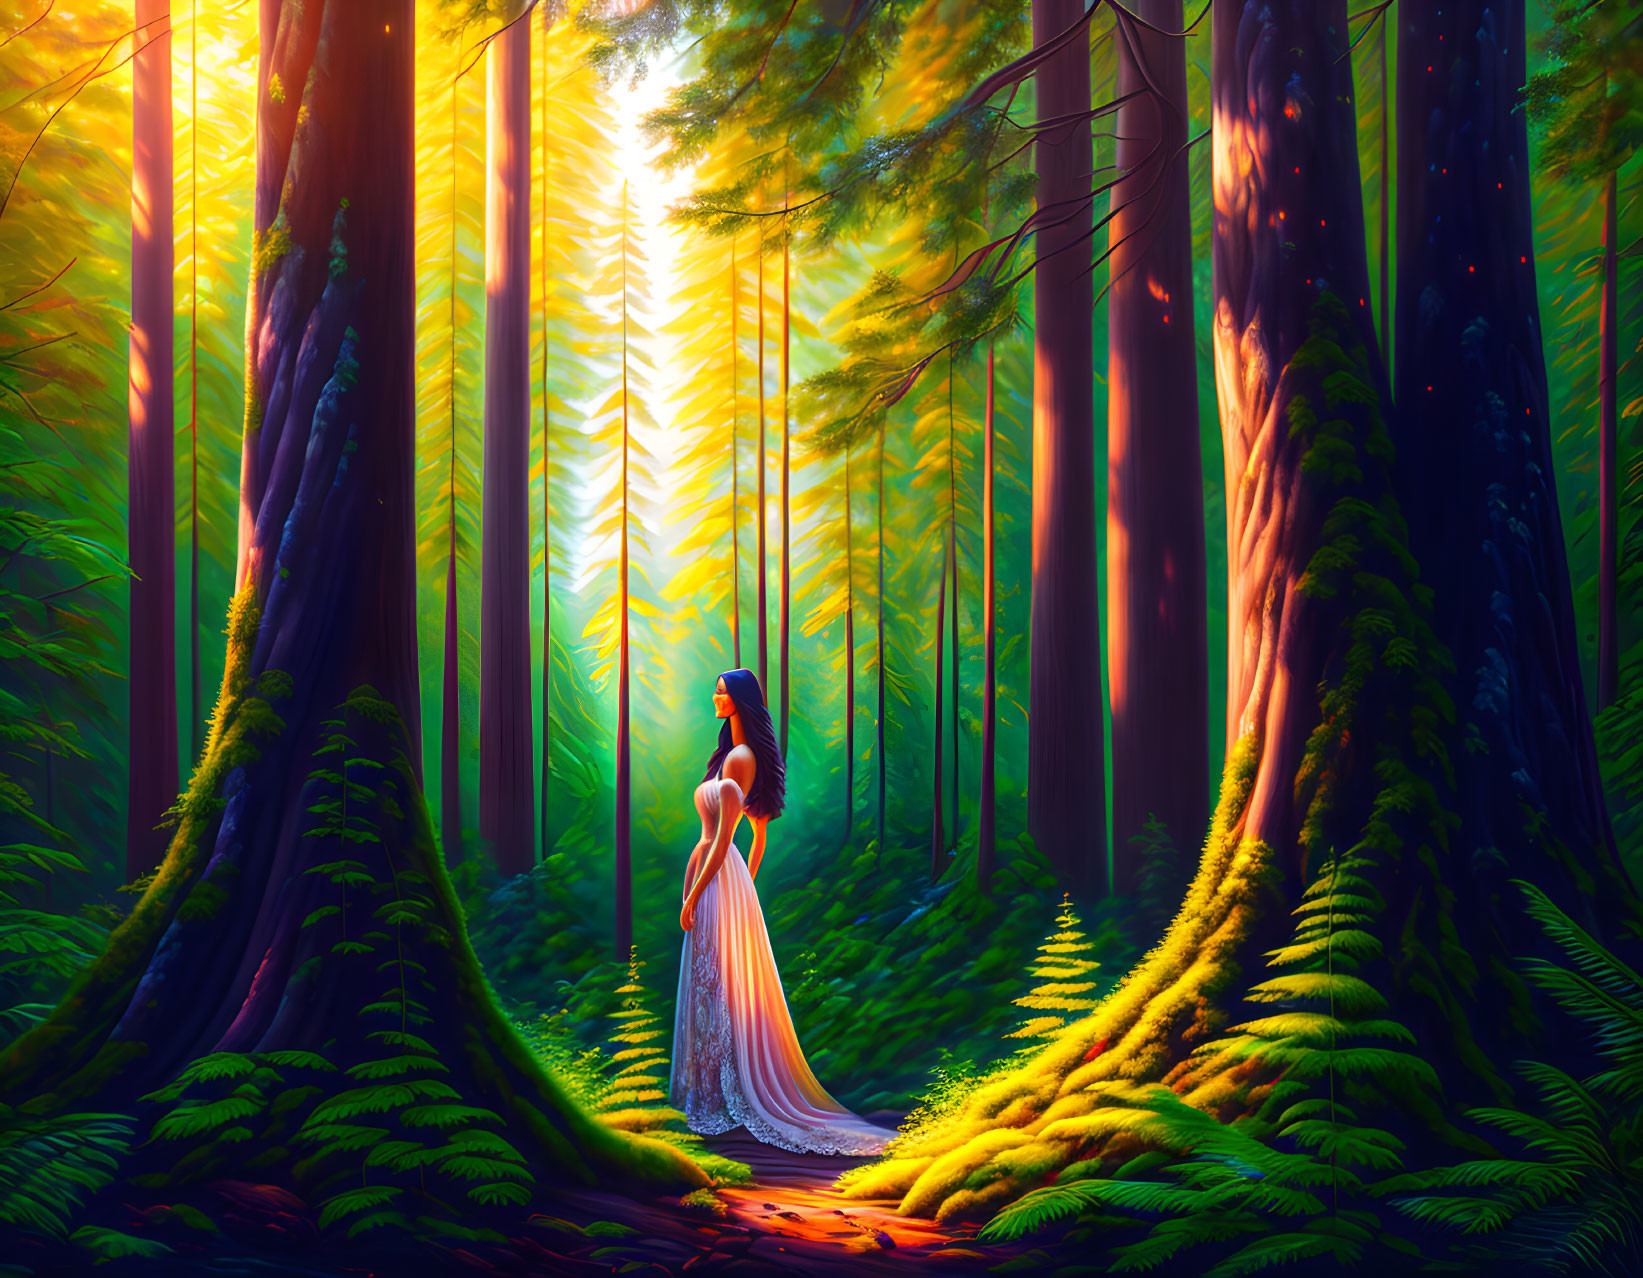 Person in flowing dress in vibrant forest with sunbeams and tall trees